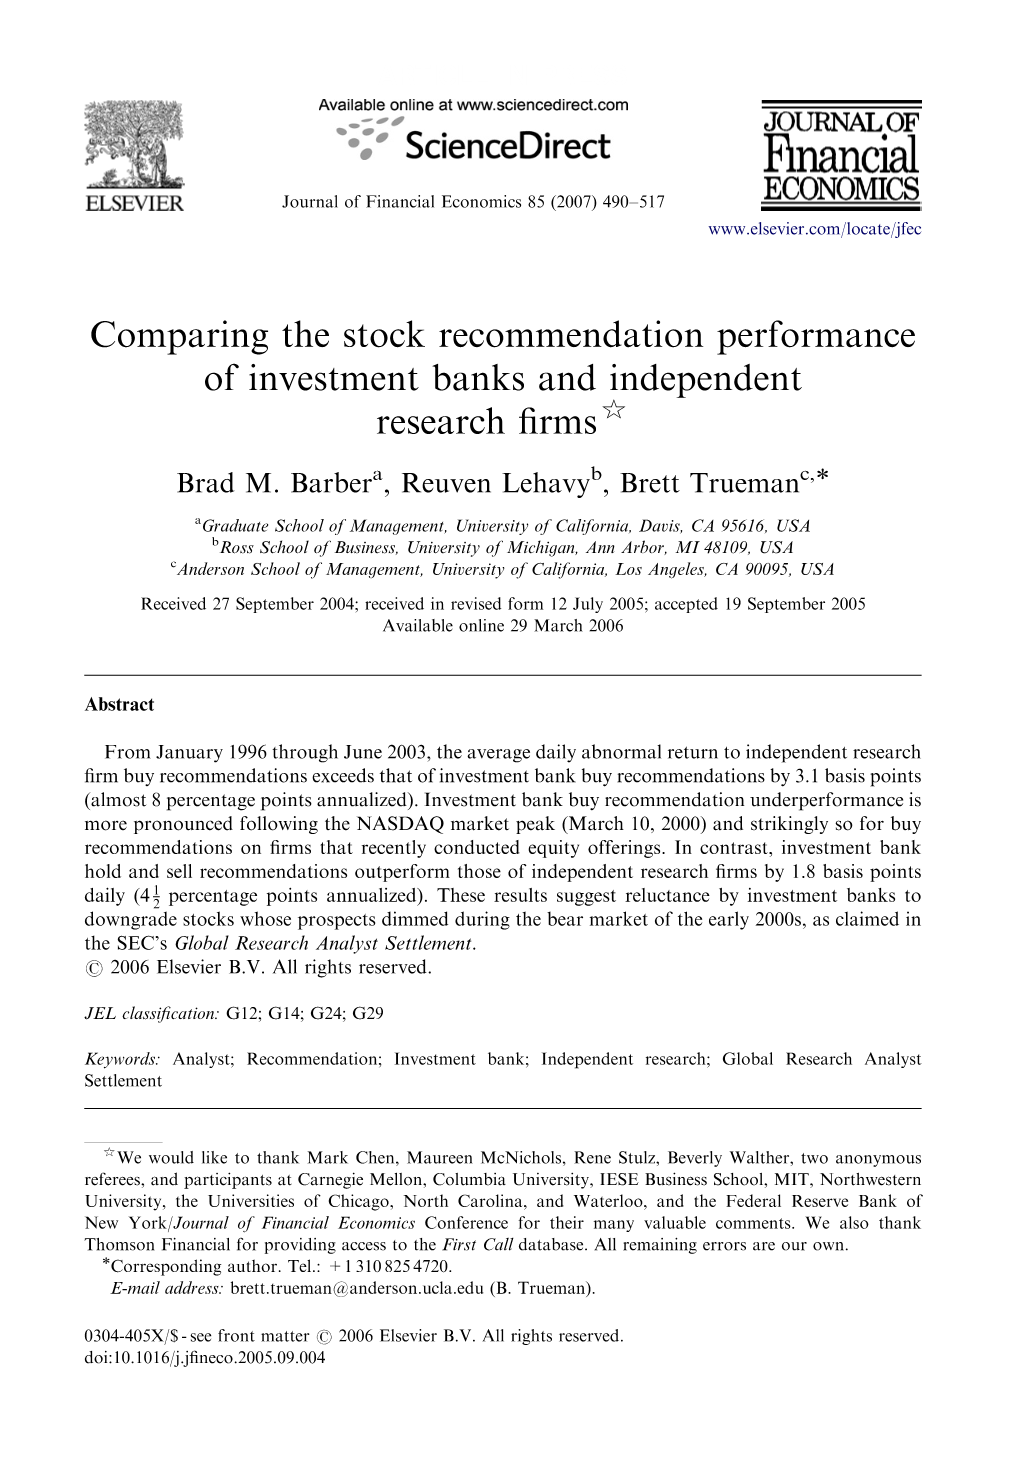 Comparing the Stock Recommendation Performance of Investment Banks and Independent Research ﬁrms$